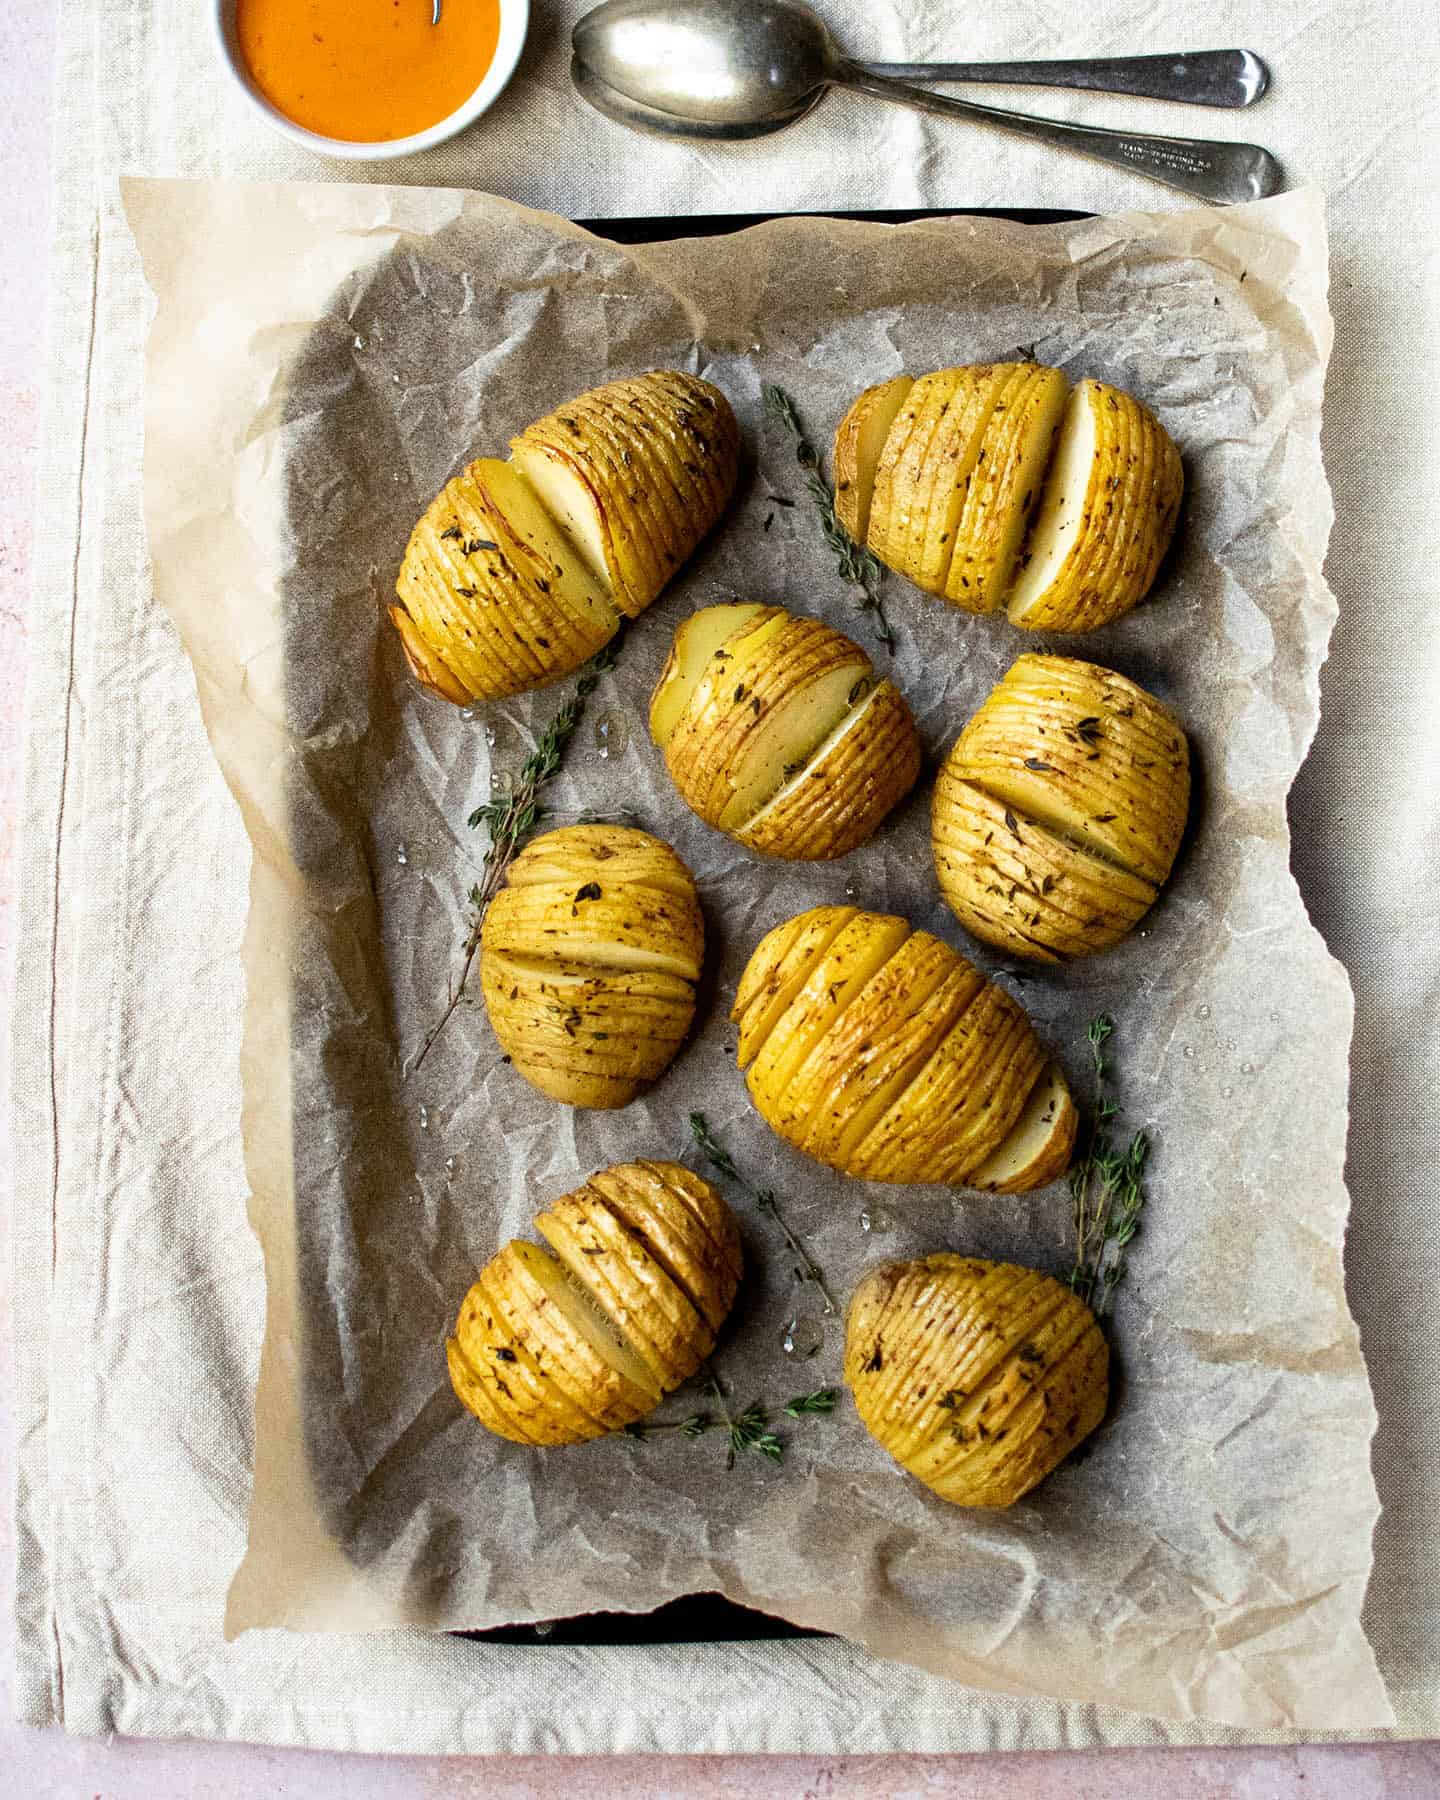 Top down view of herby hasselback potatoes on a tray with a spoon above them, next to a small dish of orange sauce